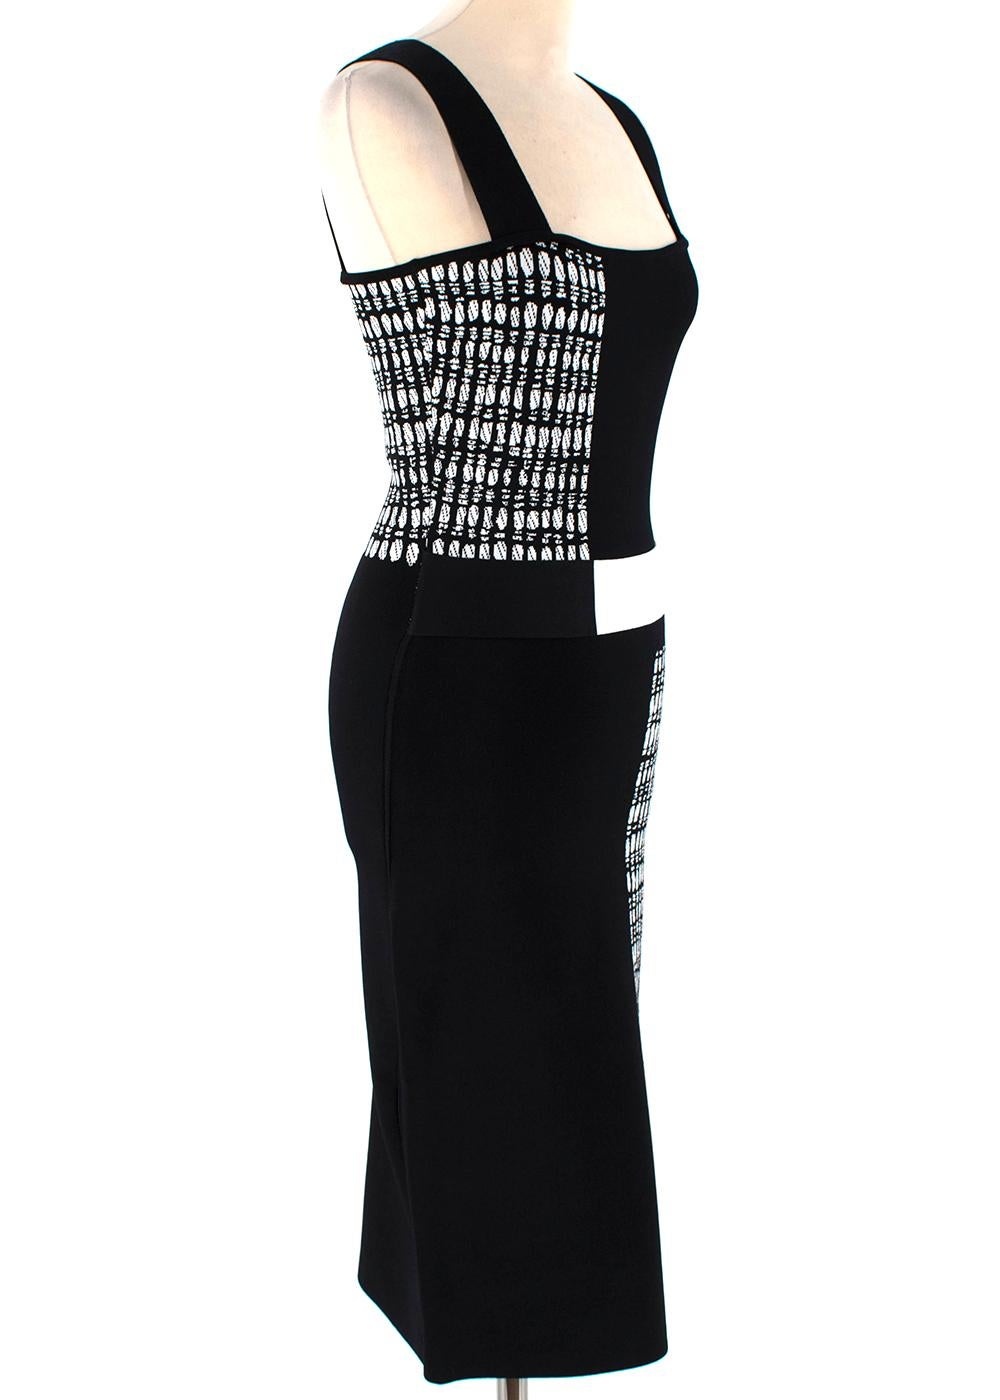 Roland Mouret Black & White Knit Dress 

-Made of soft knit 
-Gorgeous white graphical print 
-Black and white strap detail to the waist 
-Shoulder straps 
-Midi length 
-Classic elegant style 

Materials:
73% viscose, 27% lycra

Dry clean only